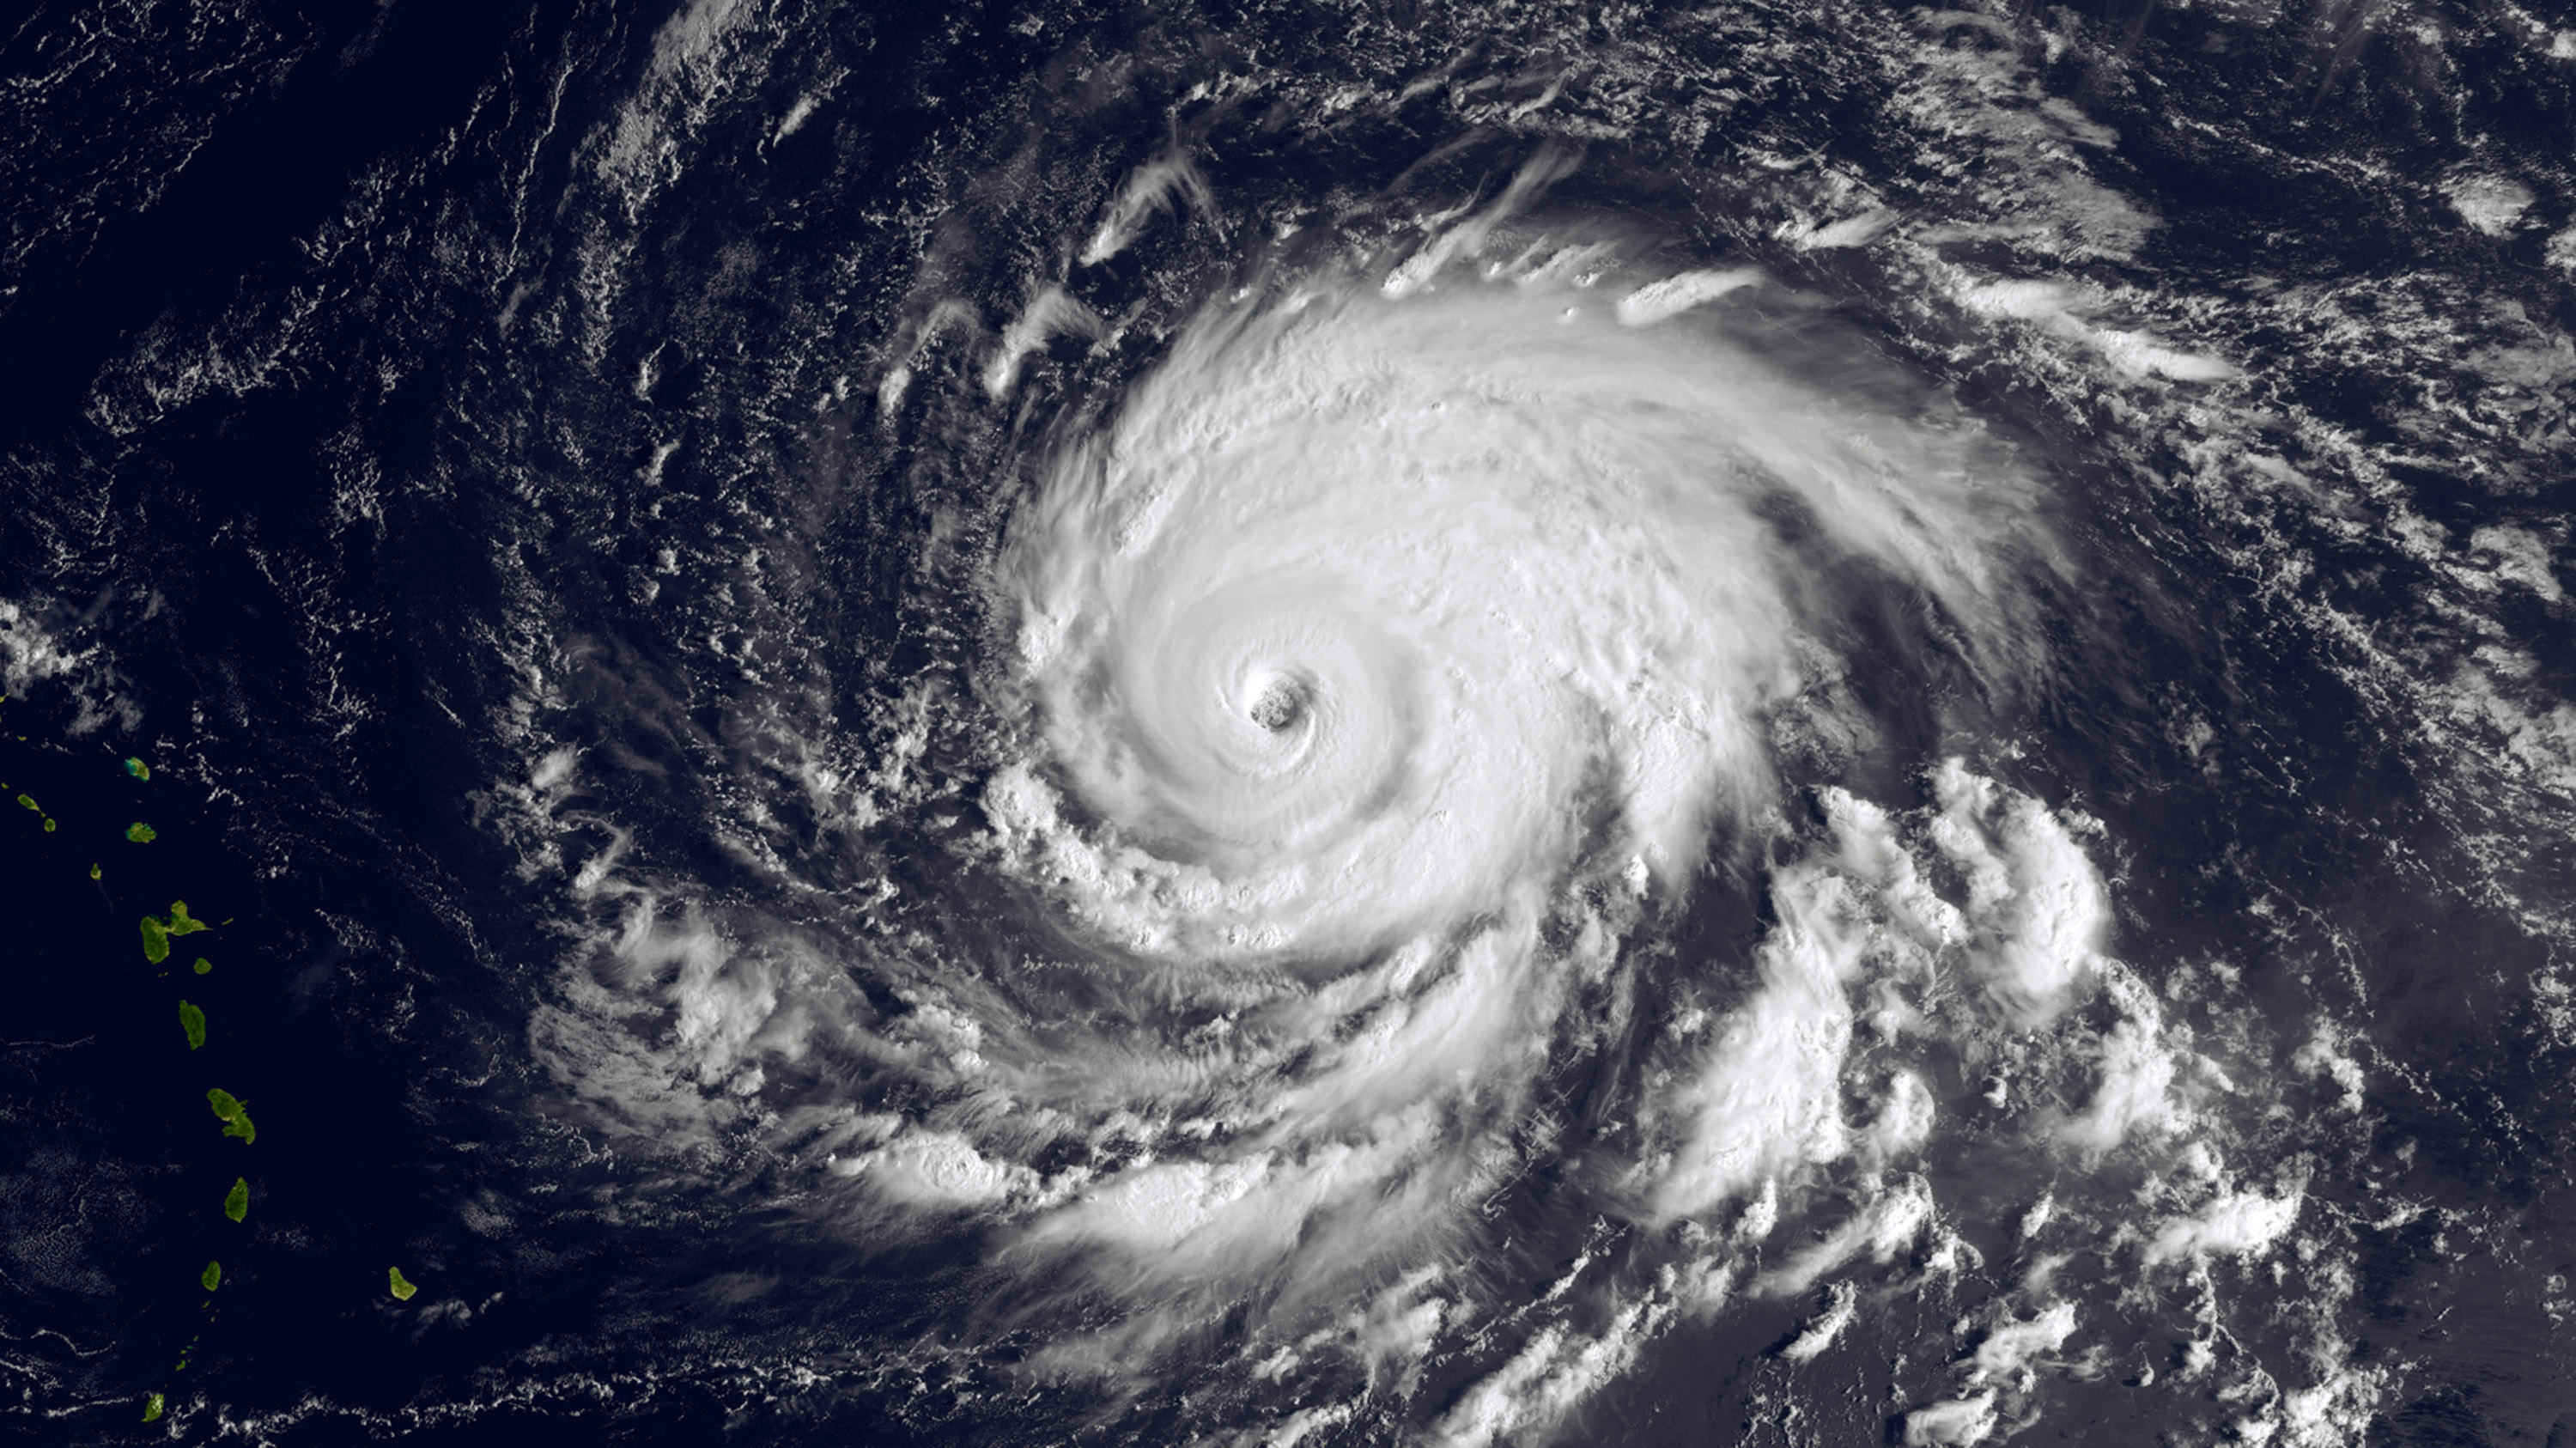 Hurricane Igor gets stronger as it turns west-northwest in the direction of Bermuda on Sept. 14, 2010 in the Atlantic Ocean as seen from space. (NOAA/Getty Images)